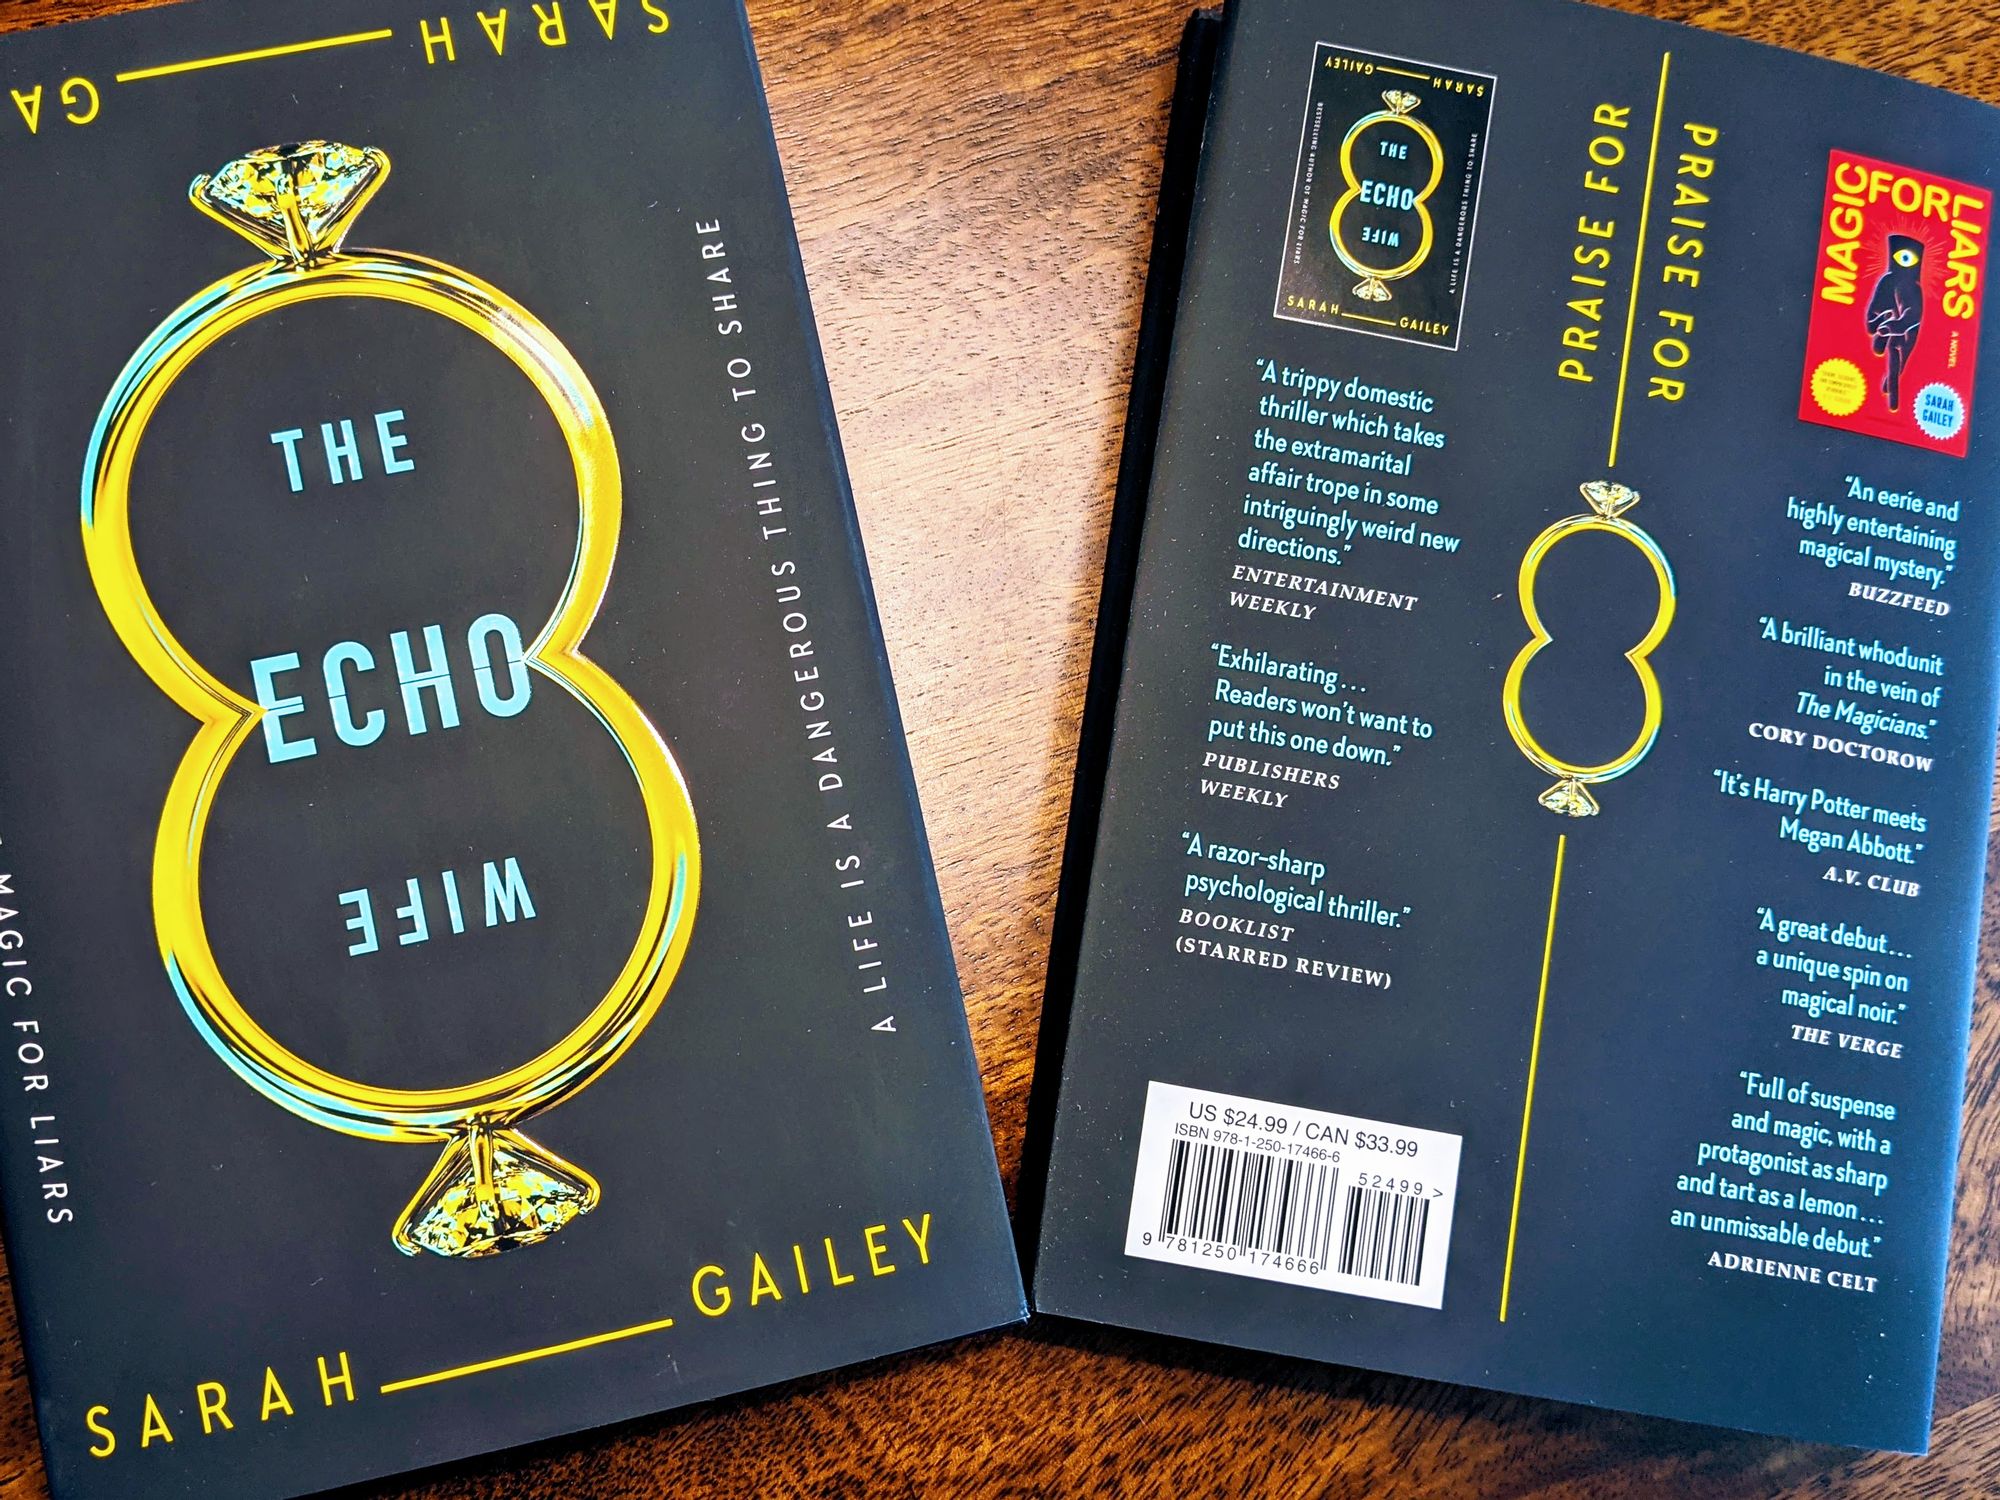 The front and back covers of The Echo Wife, which comes out next week. Did I mention it comes out next week?